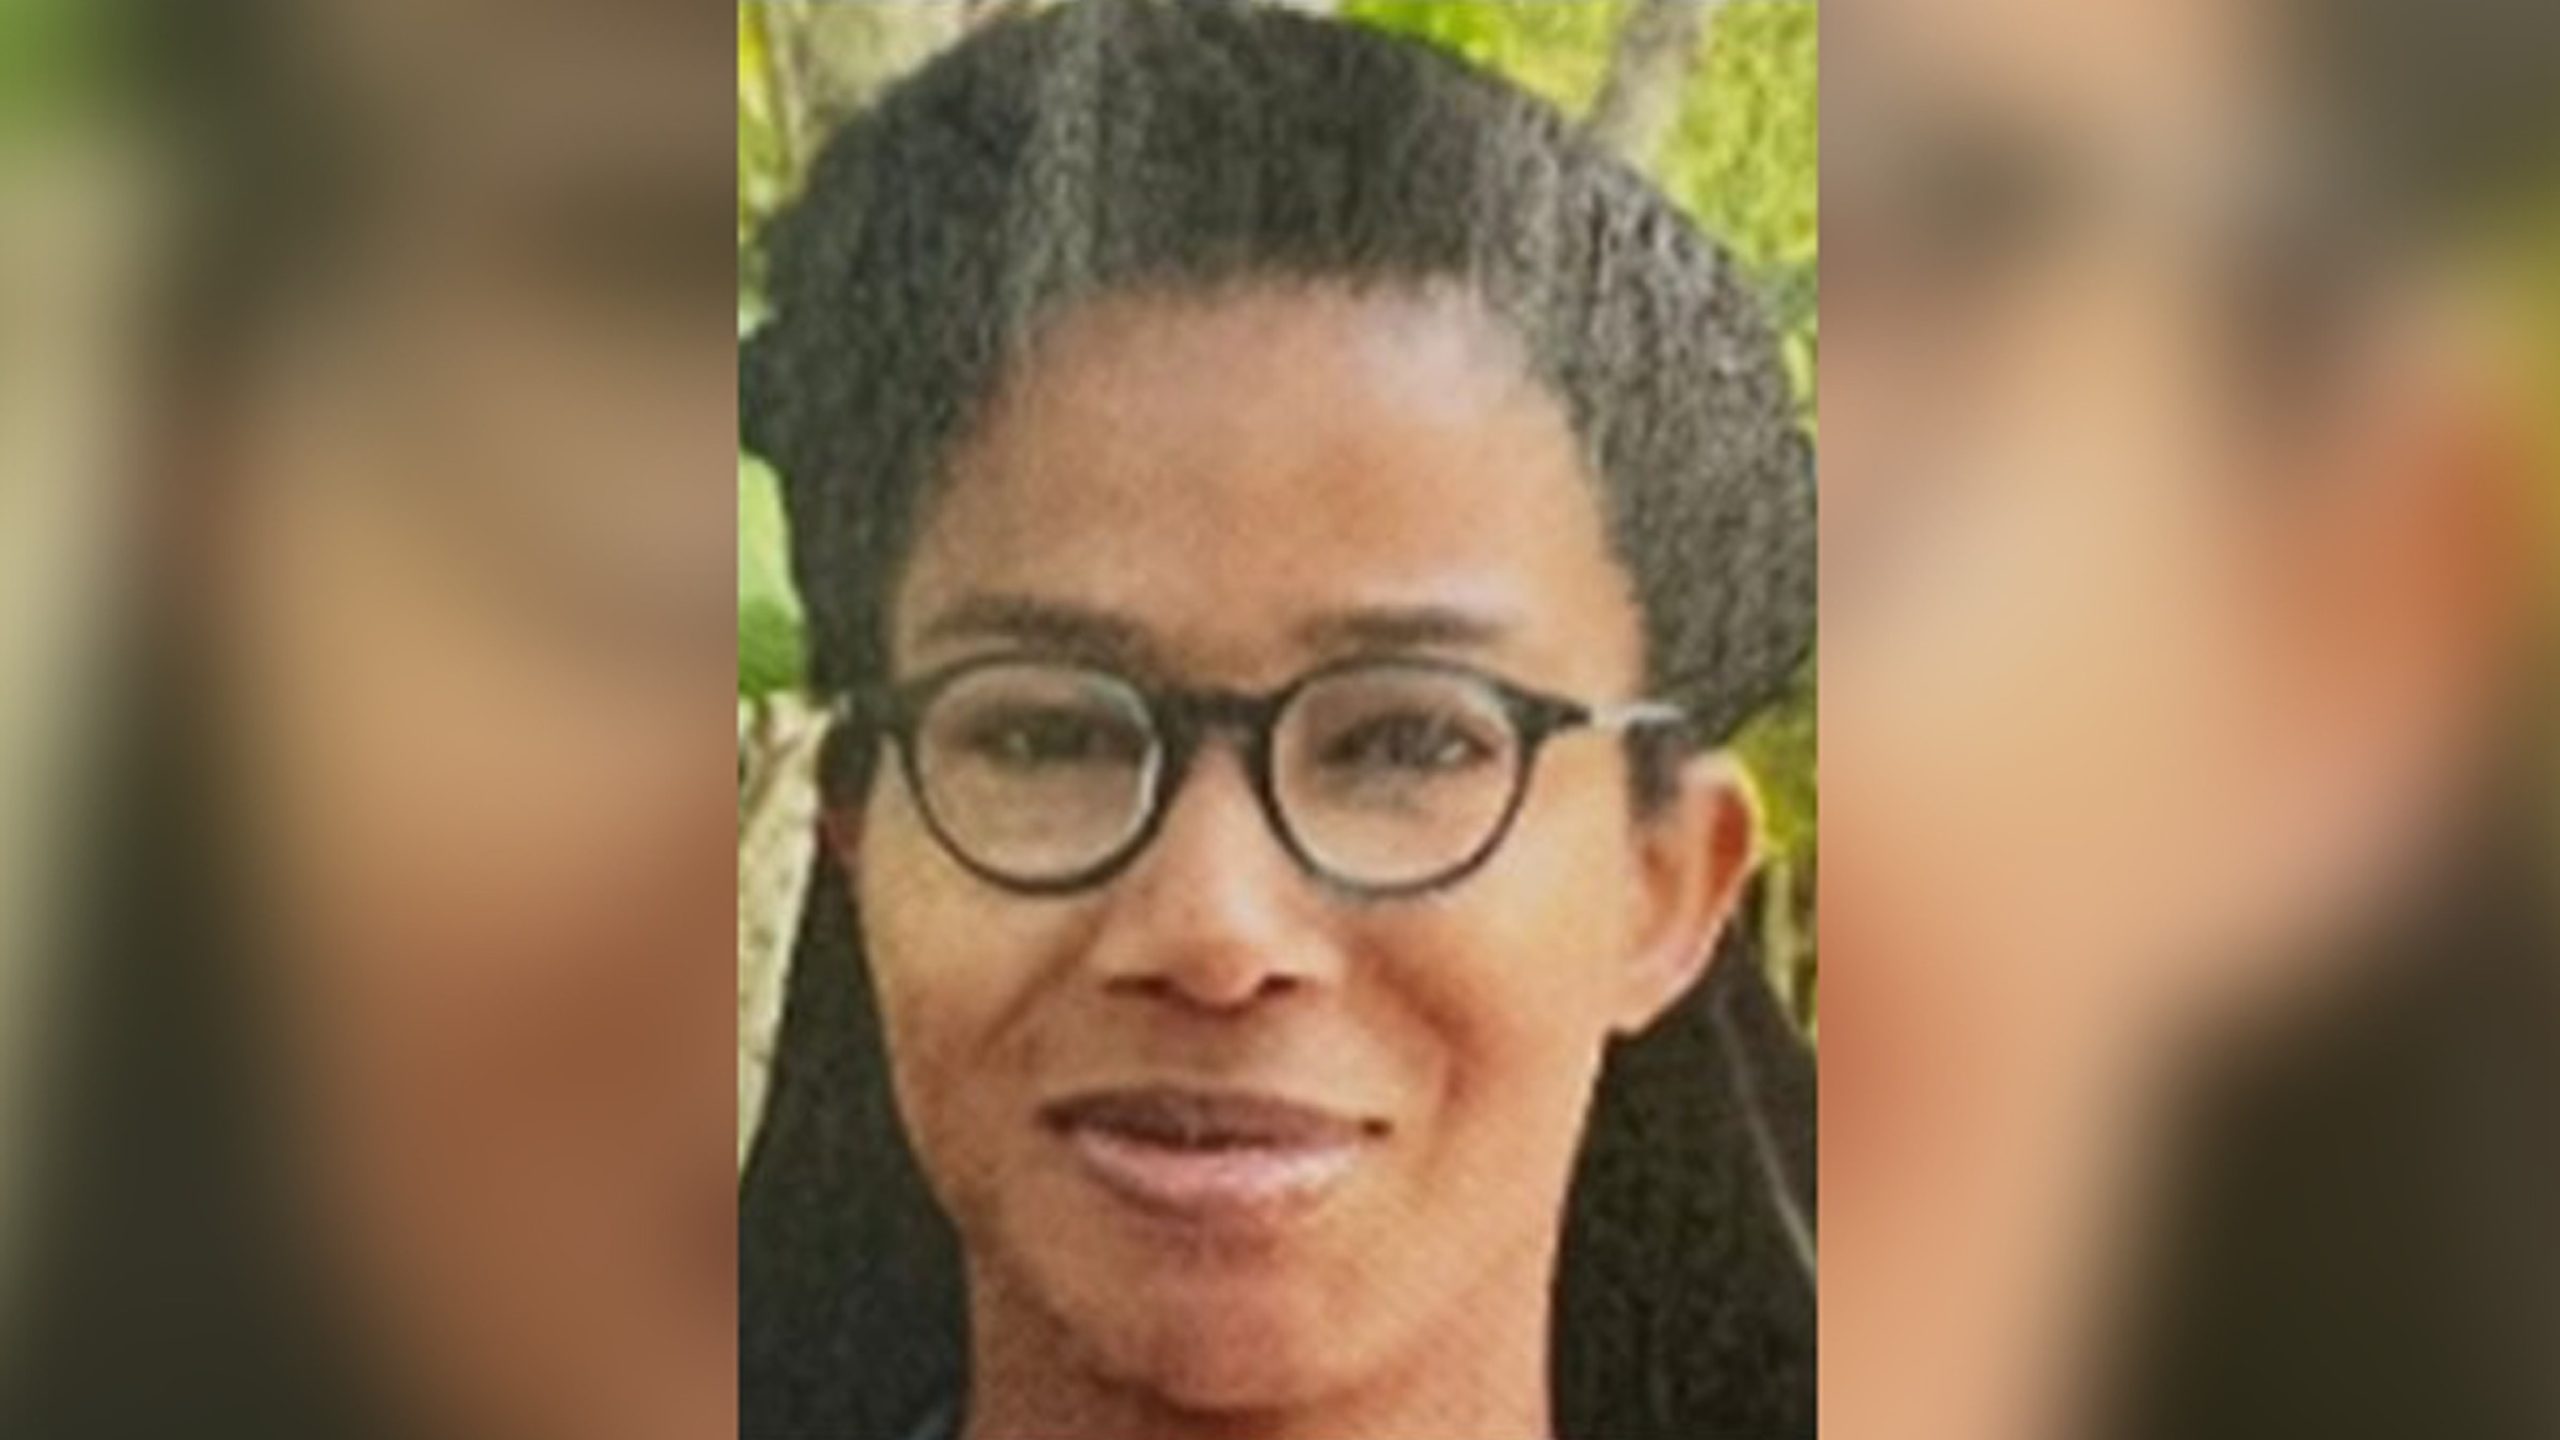 Chicago woman missing in the Bahamas: Family joins search effort to bring Taylor home